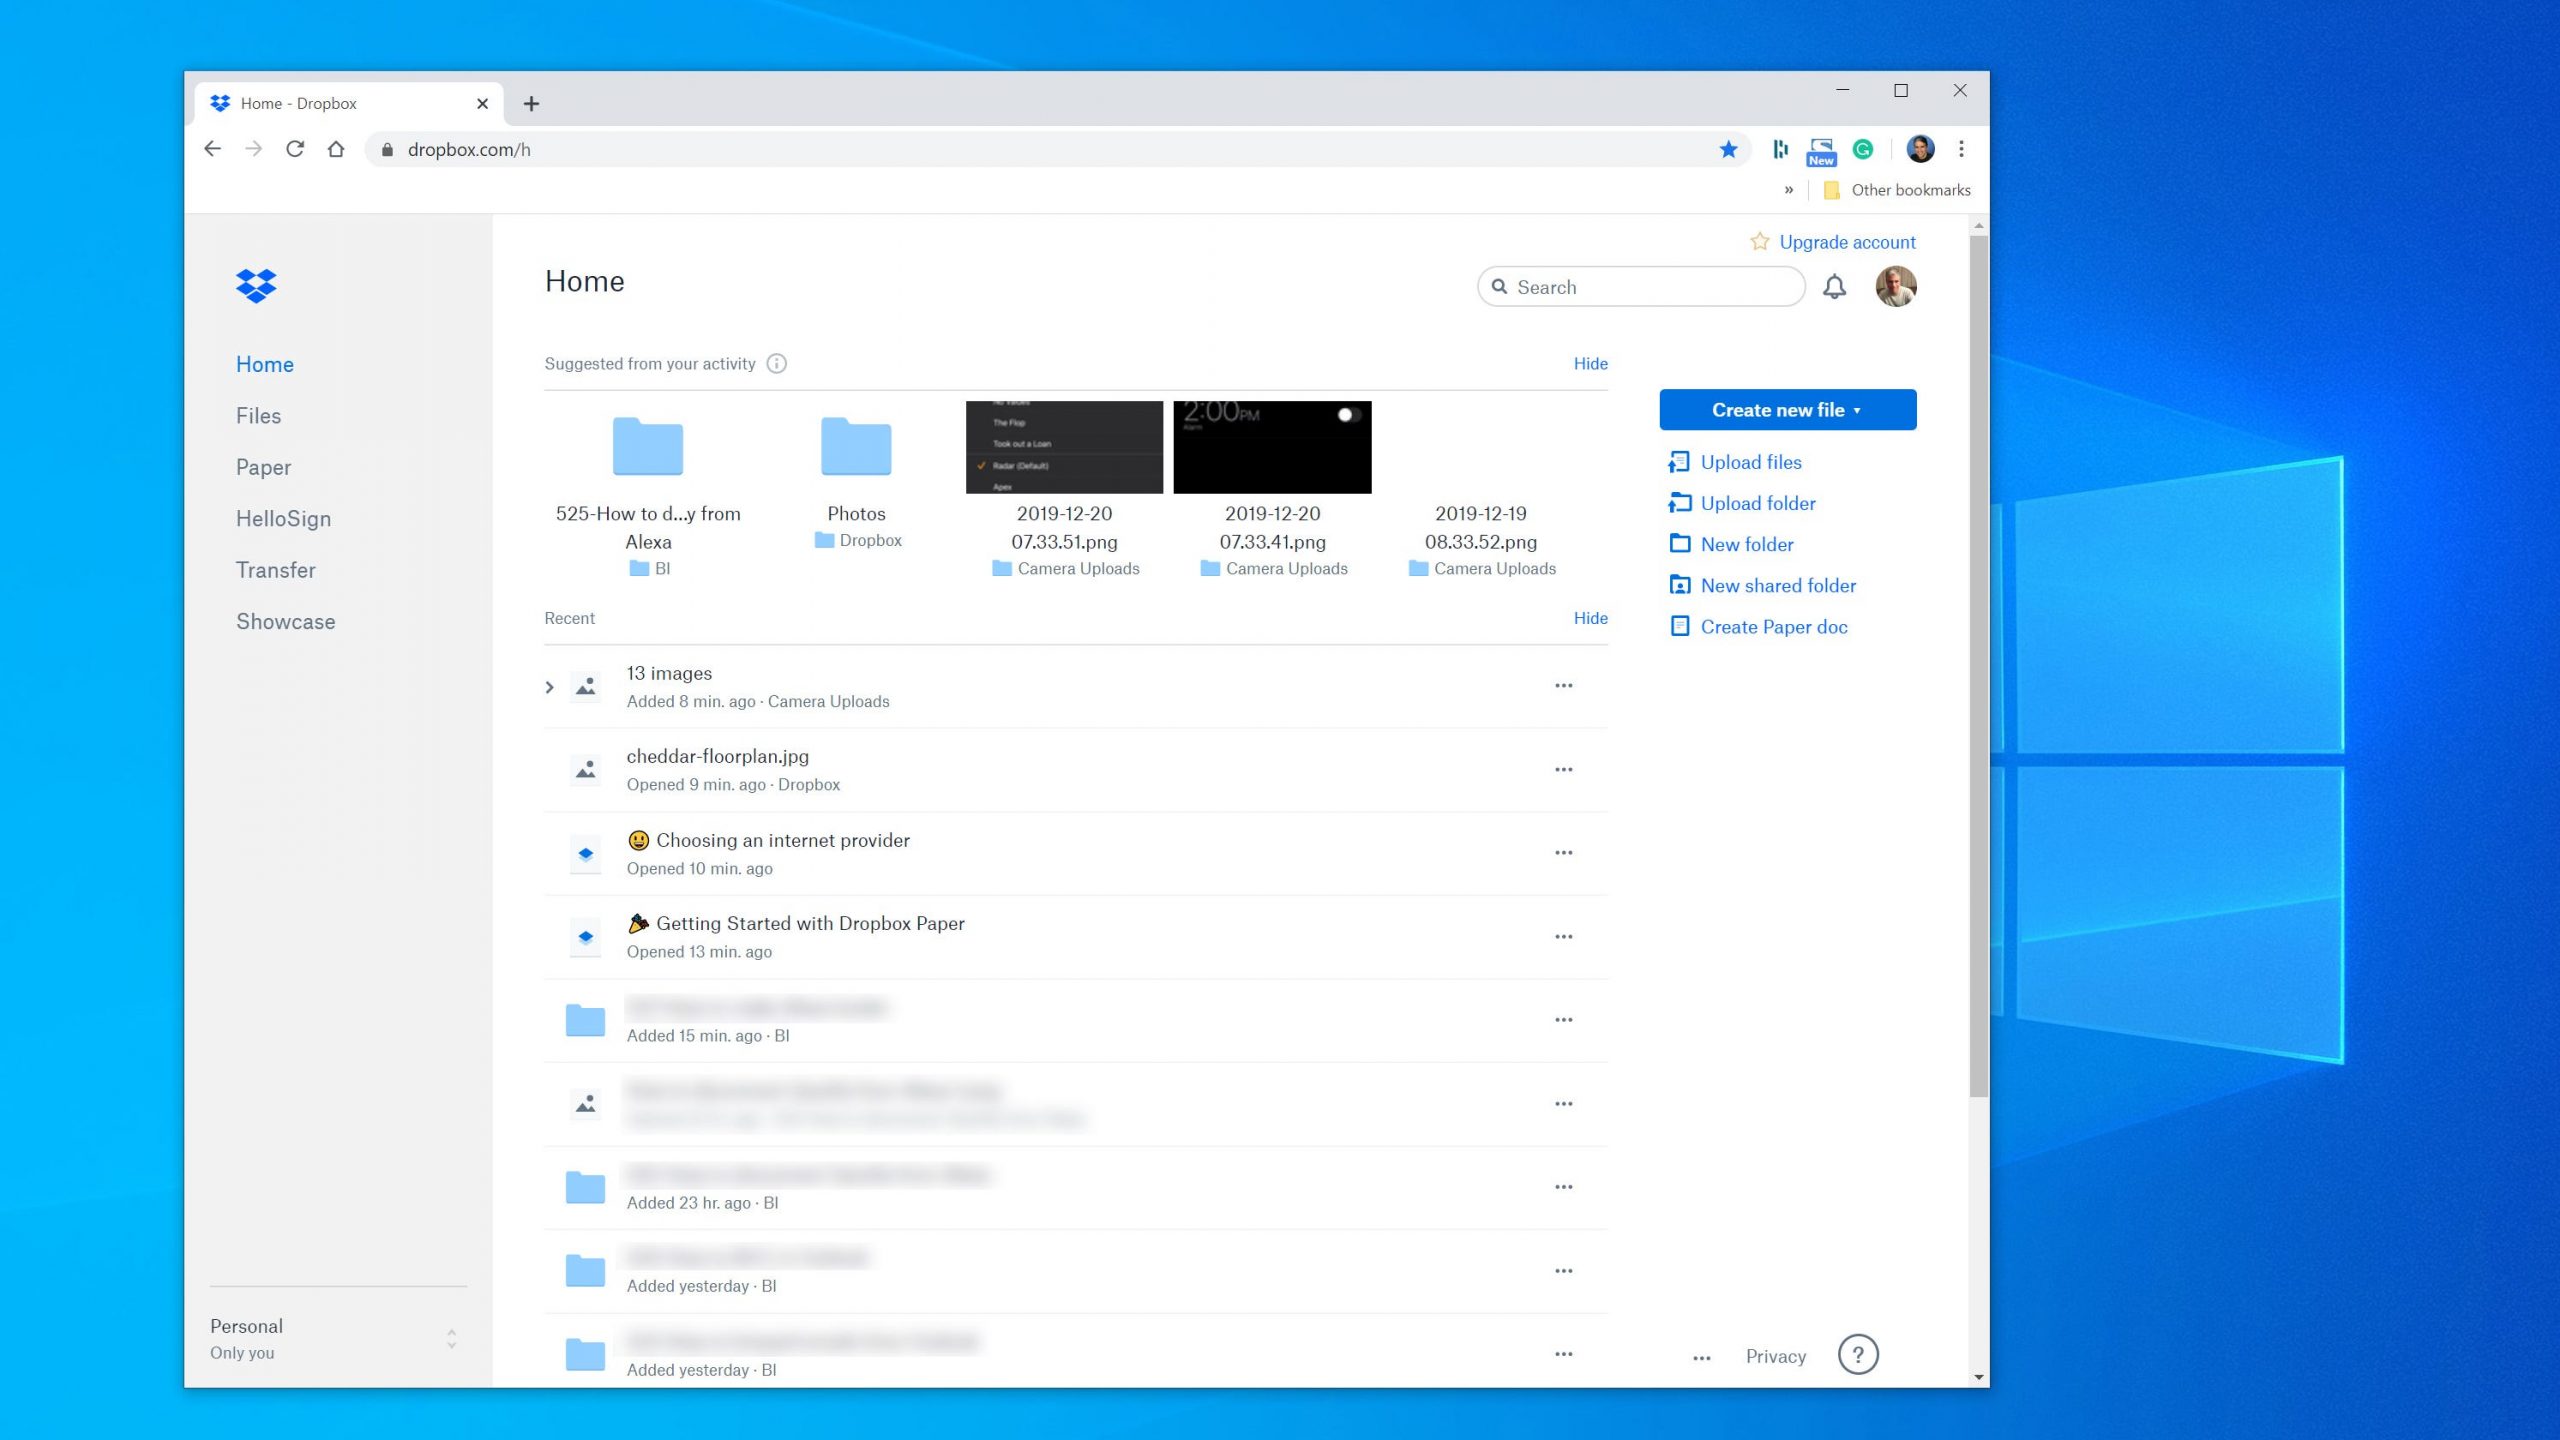 Features of Dropbox